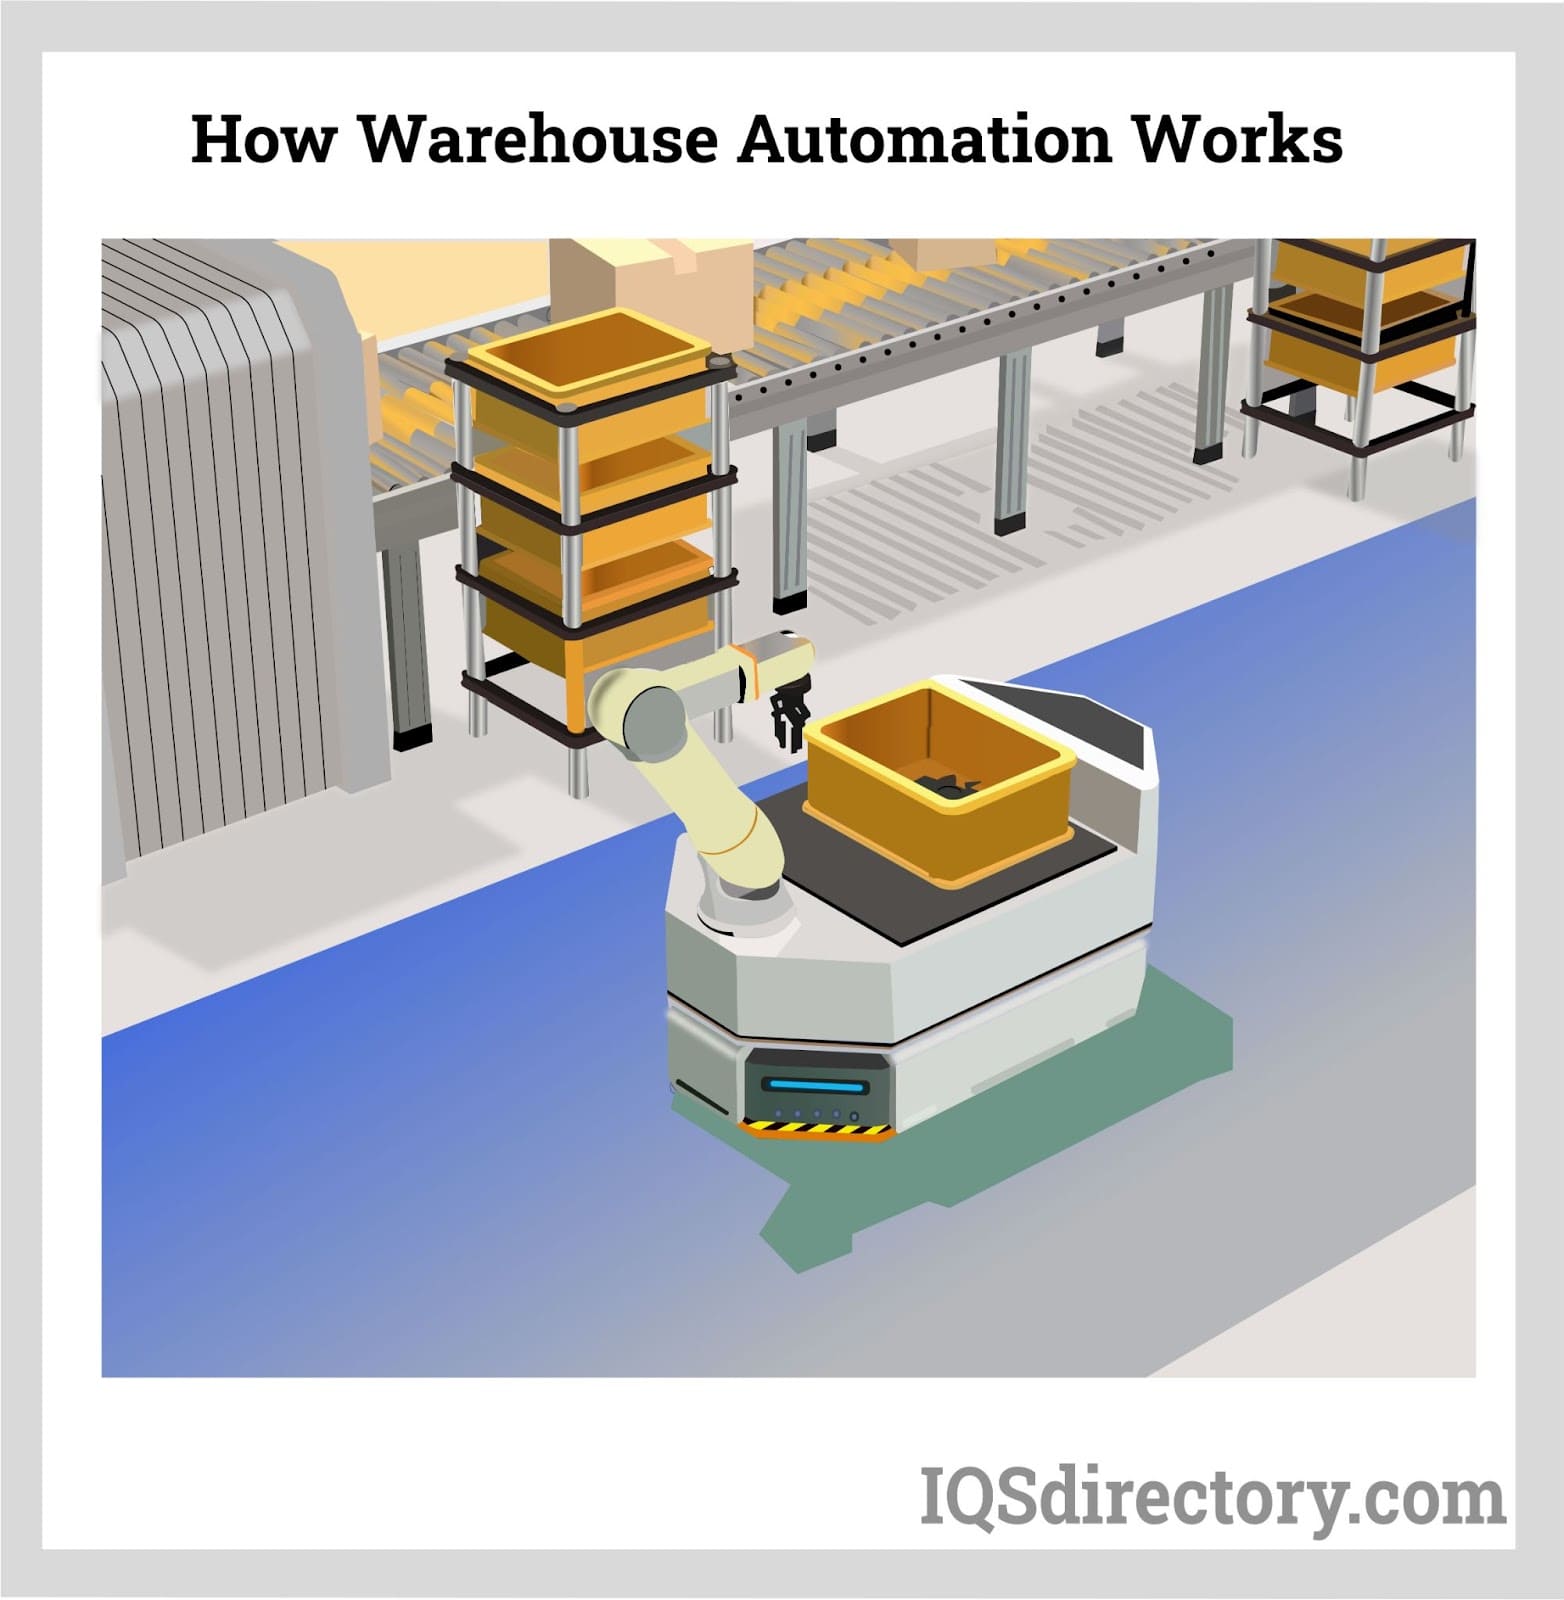 How Warehouse Automation Works